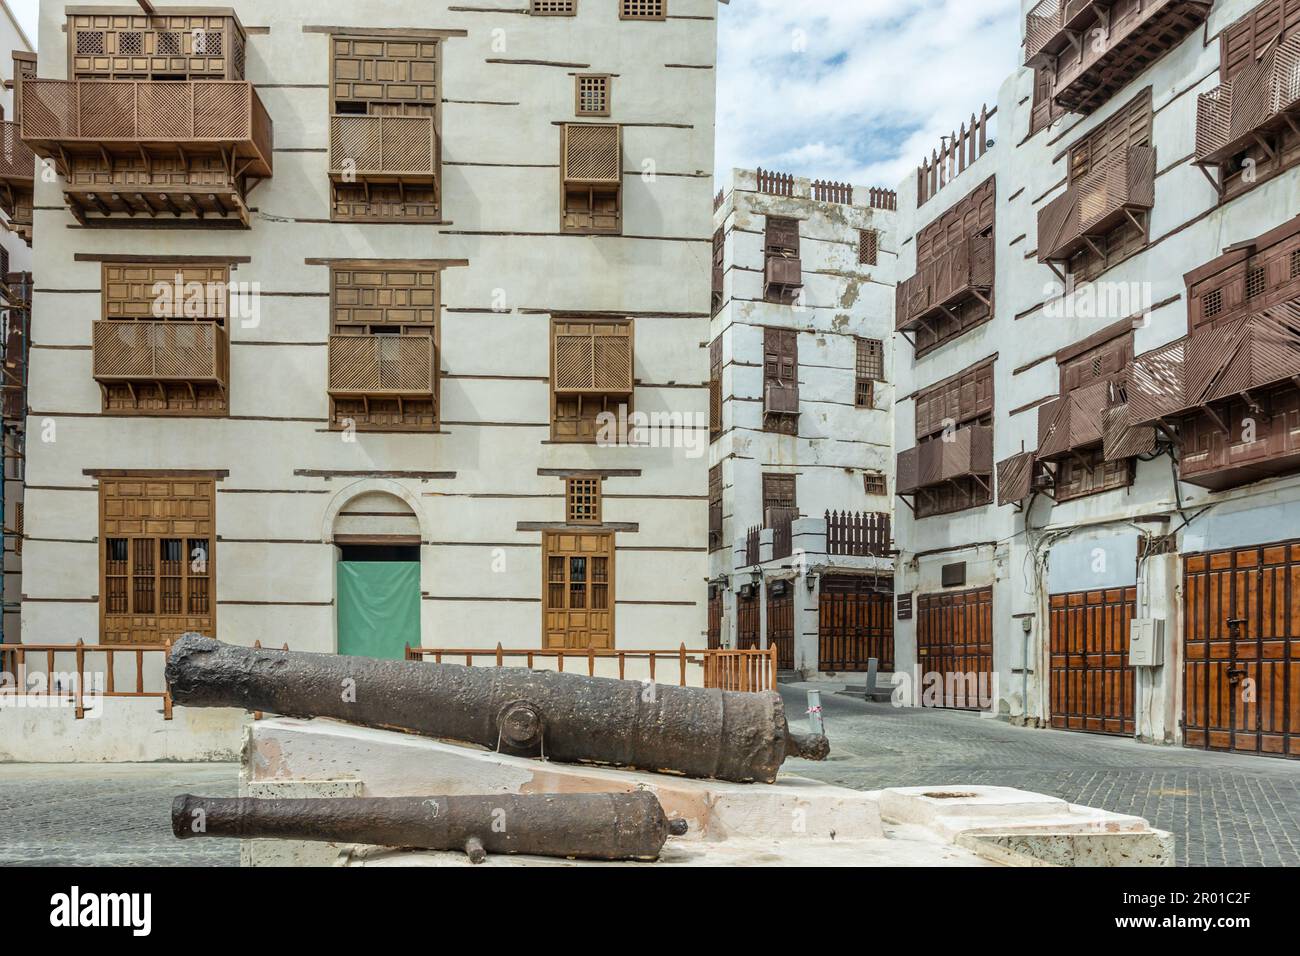 Al-Balad old town with traditional muslim houses and old cannons in the foreground, Jeddah, Saudi Arabia Stock Photo